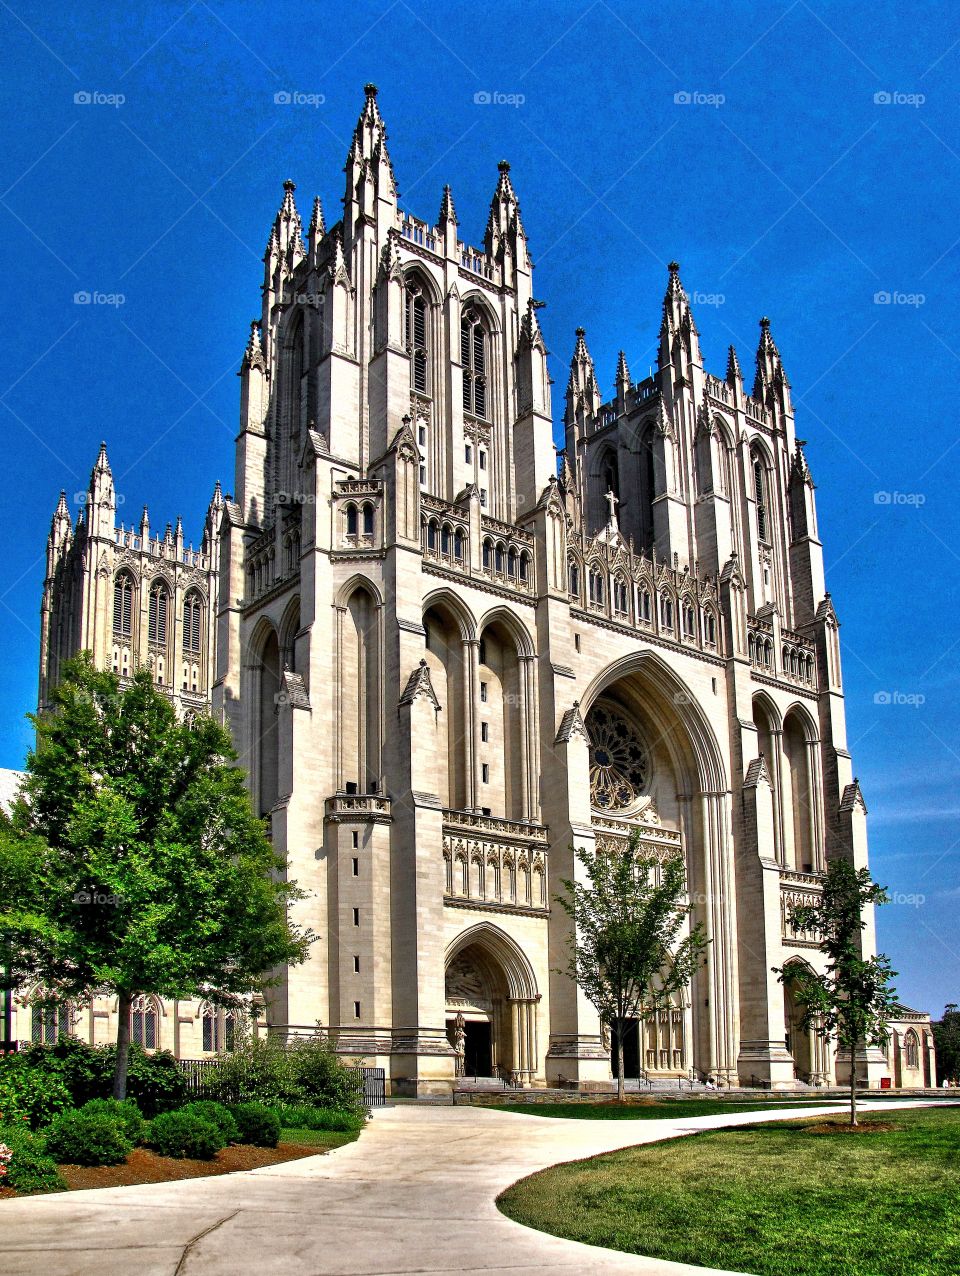 National cathedral
